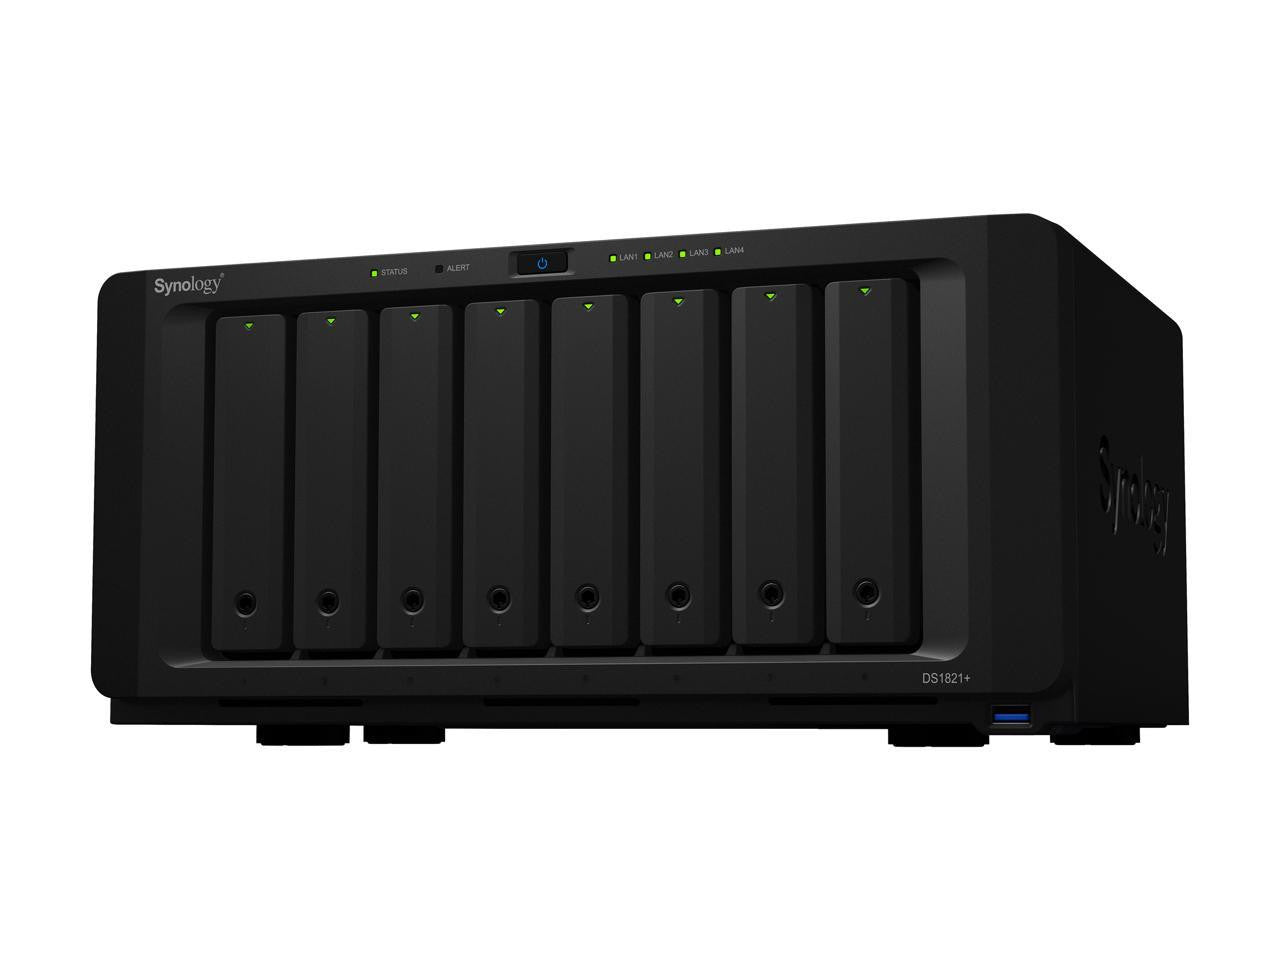 Synology DS1821+ 8-BAY DiskStation with 16GB RAM, 1.6TB (2x800GB) Cache and 96TB (8 x 12TB) of Synology Enterprise HAT5300 Drives Fully Assembled and Tested